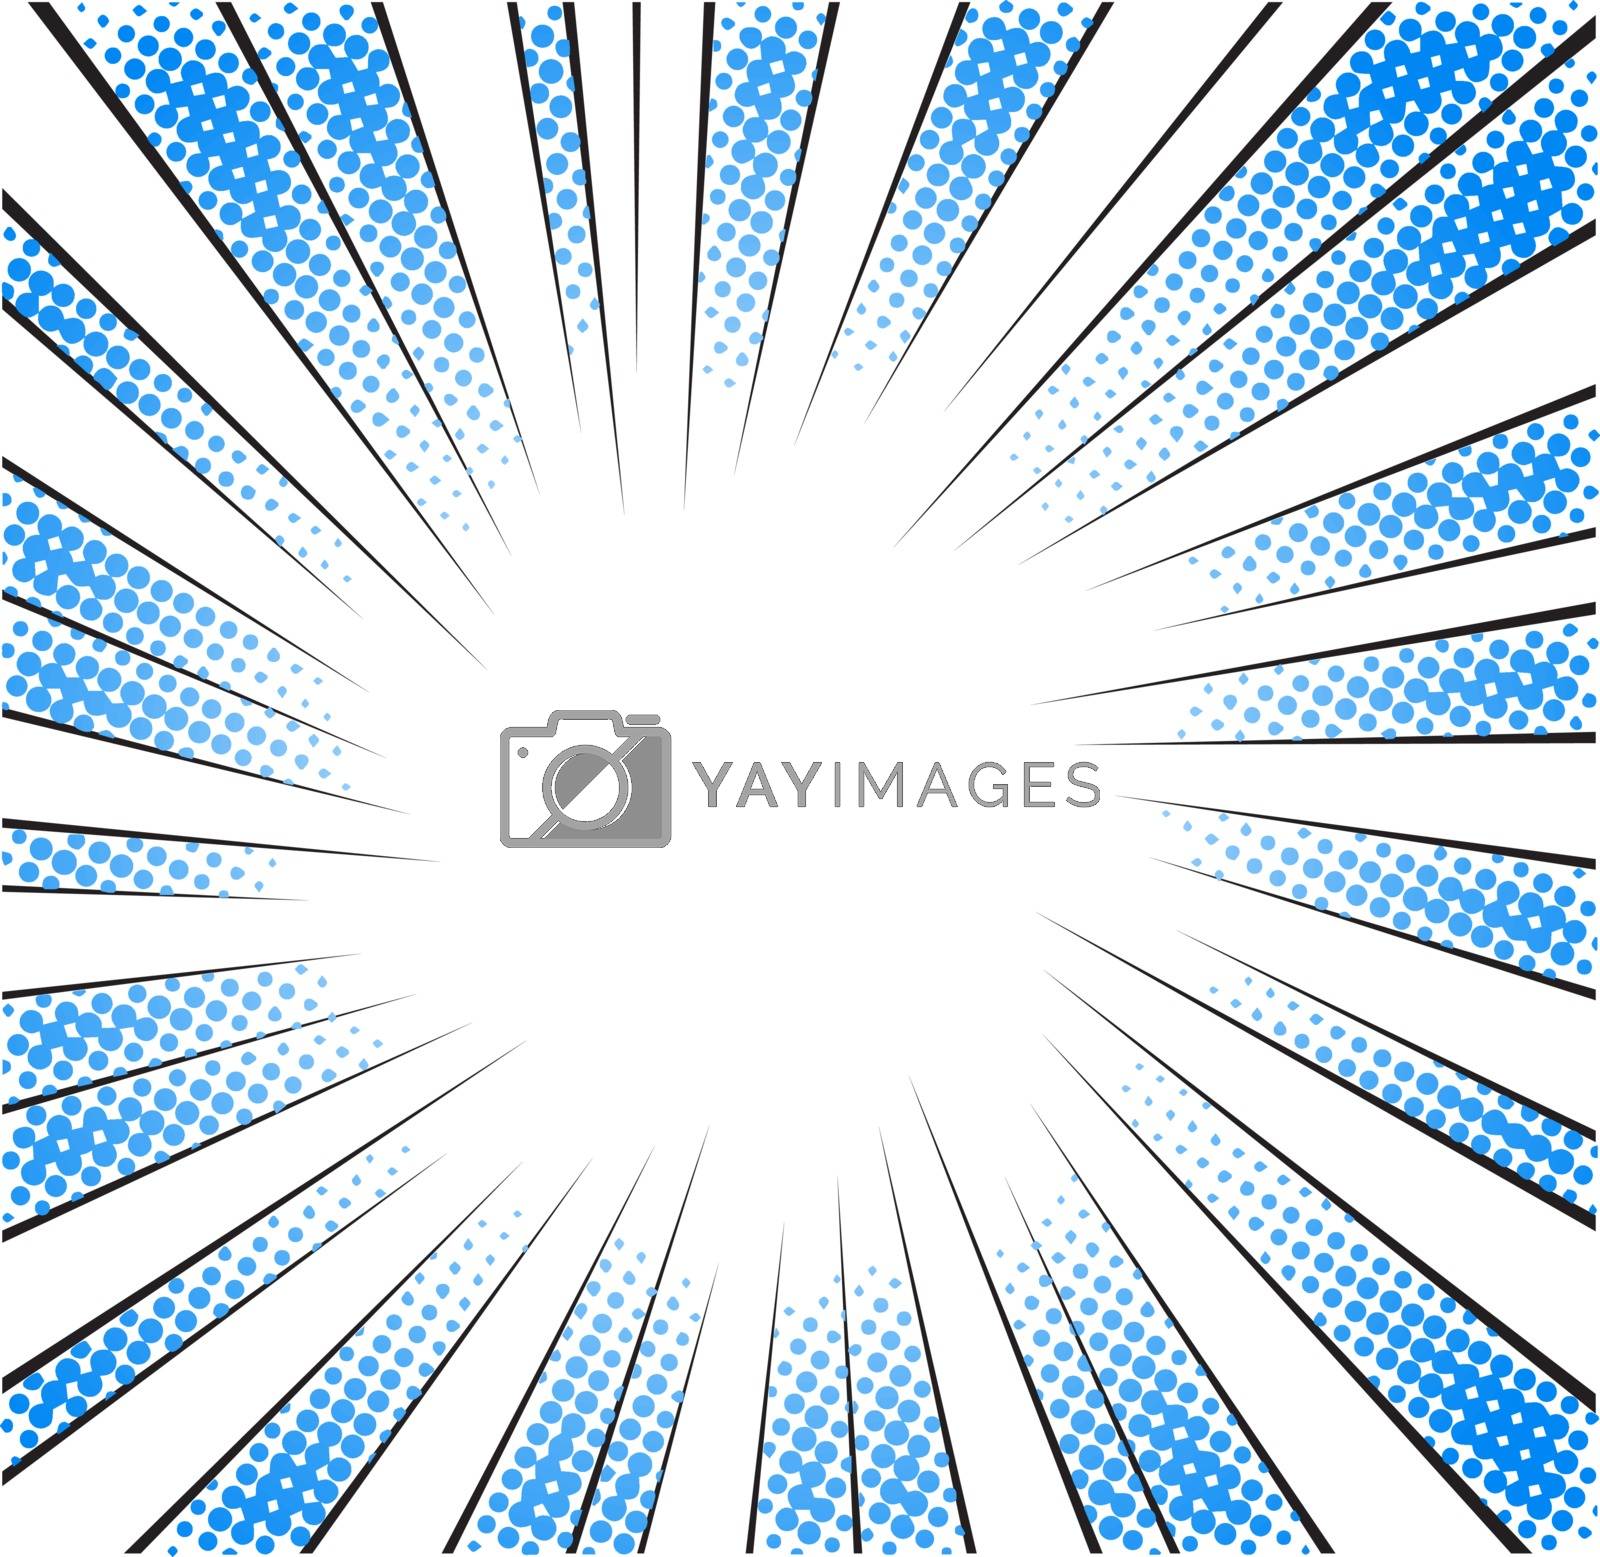 Royalty free image of blue halftone radial speed lines for comic book by wektorygrafika